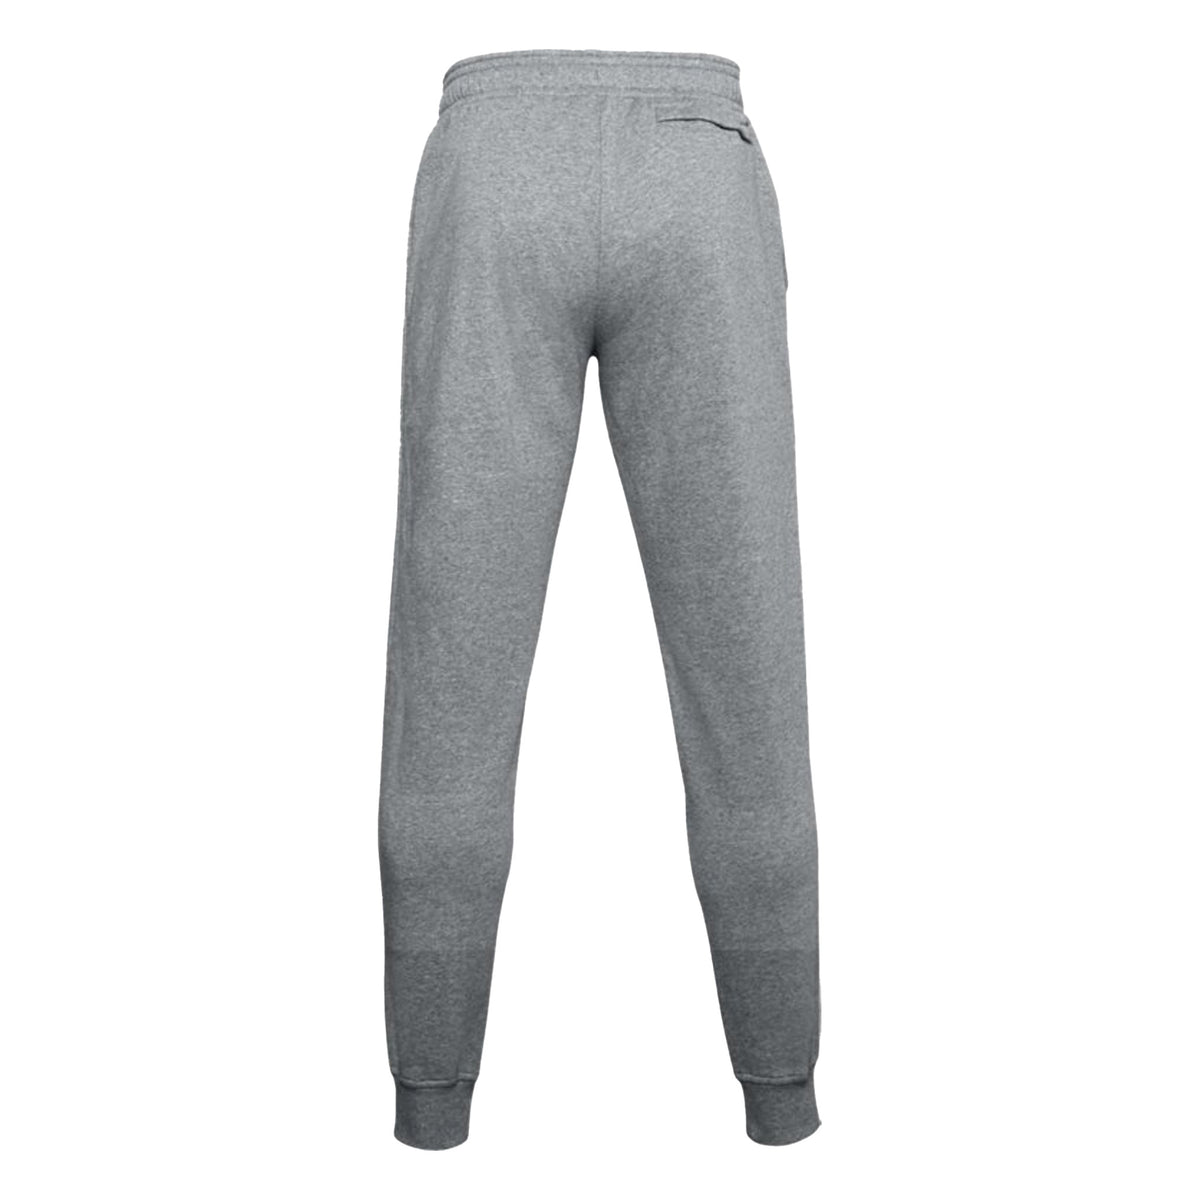 Under Armour Mens Rival Fleece Joggers: Pitch Grey